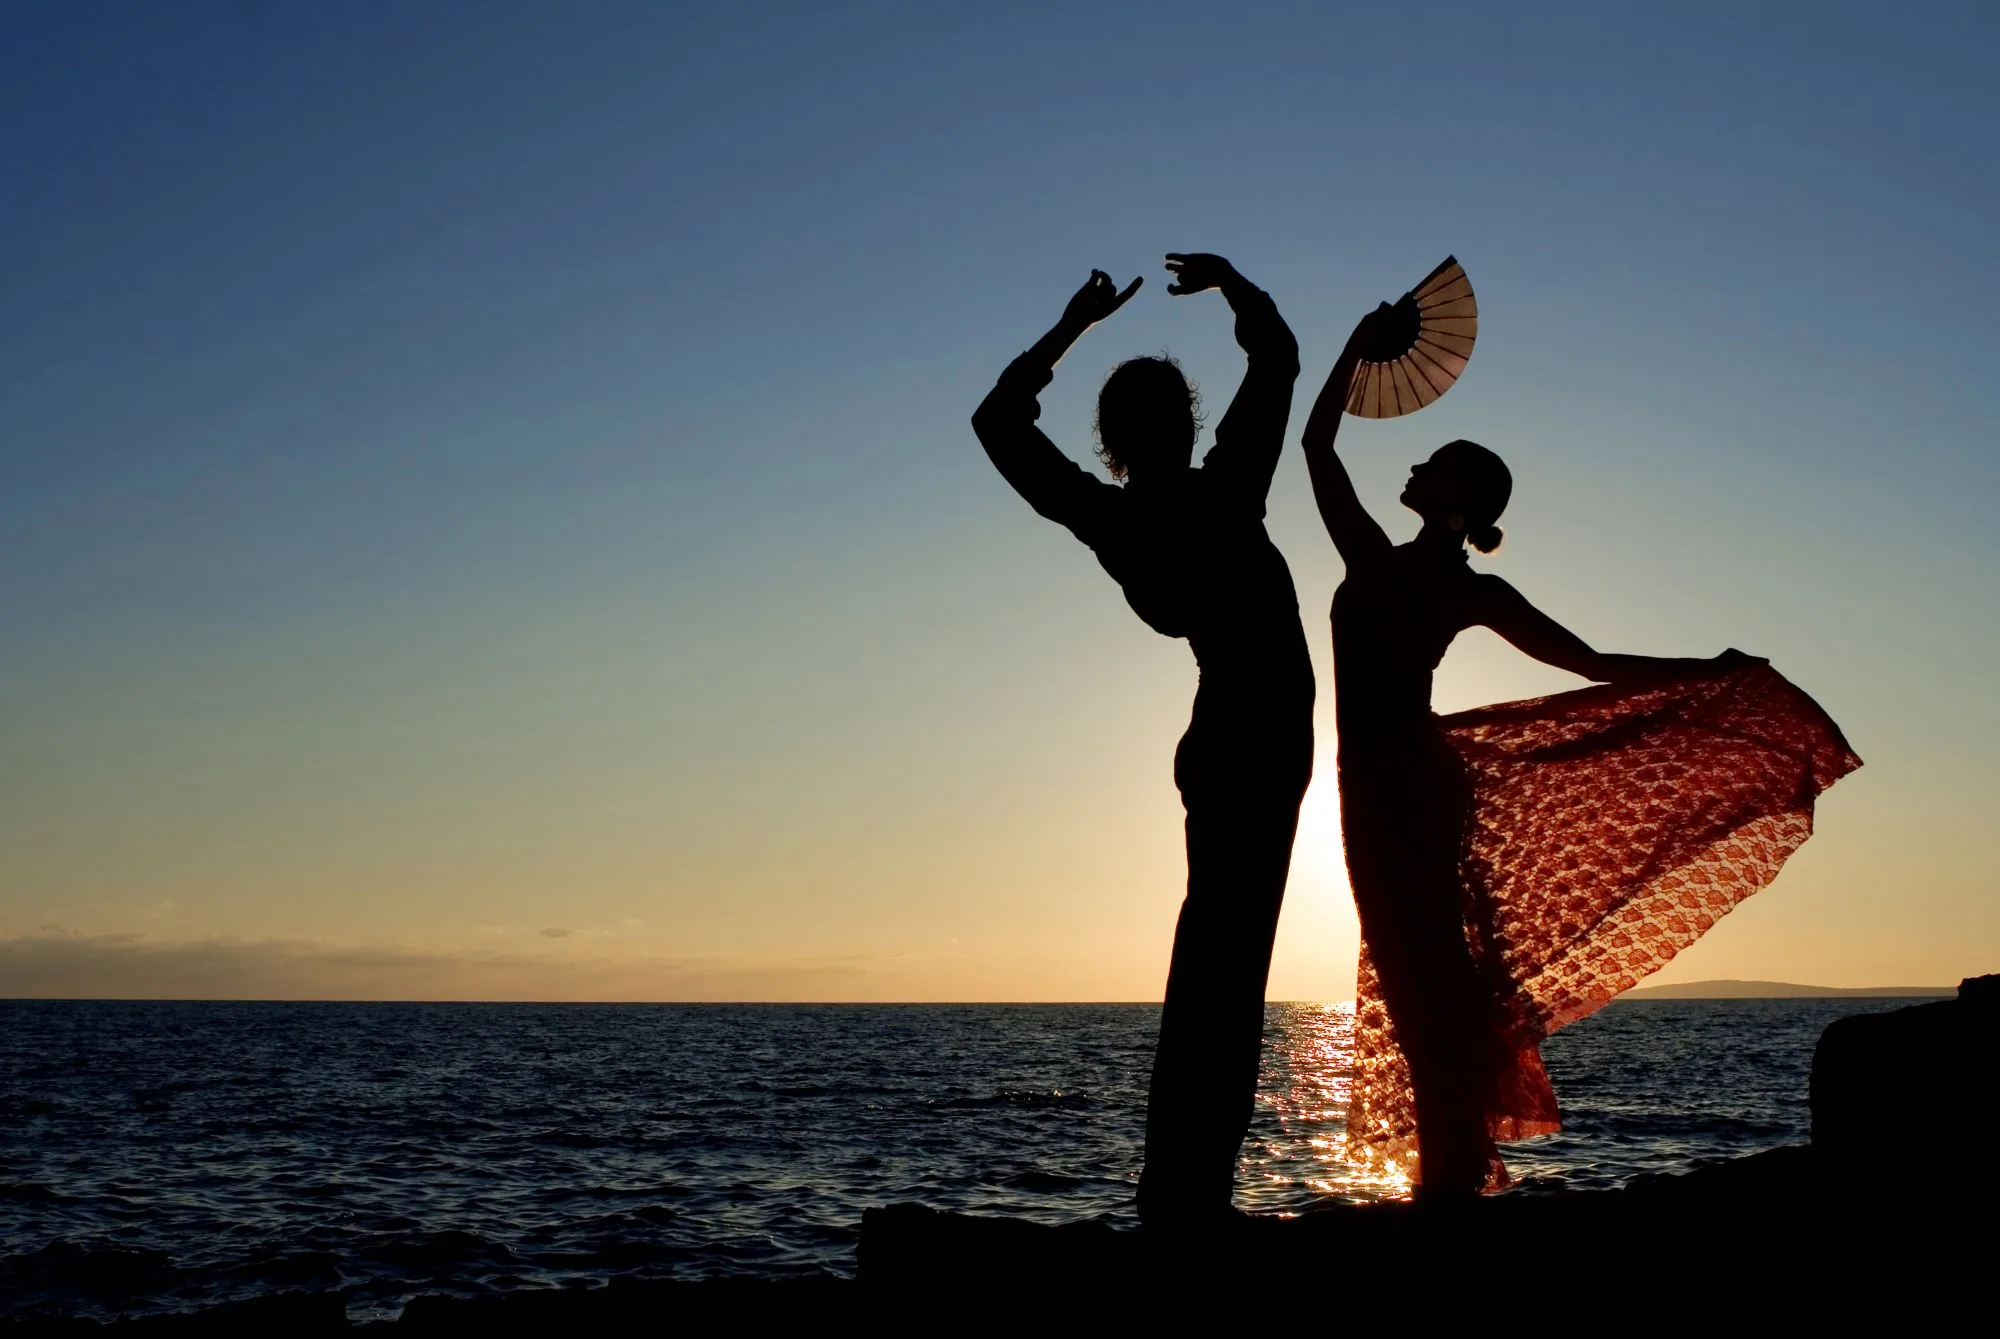 A silhouettes of a man and woman Flamenco dancers.